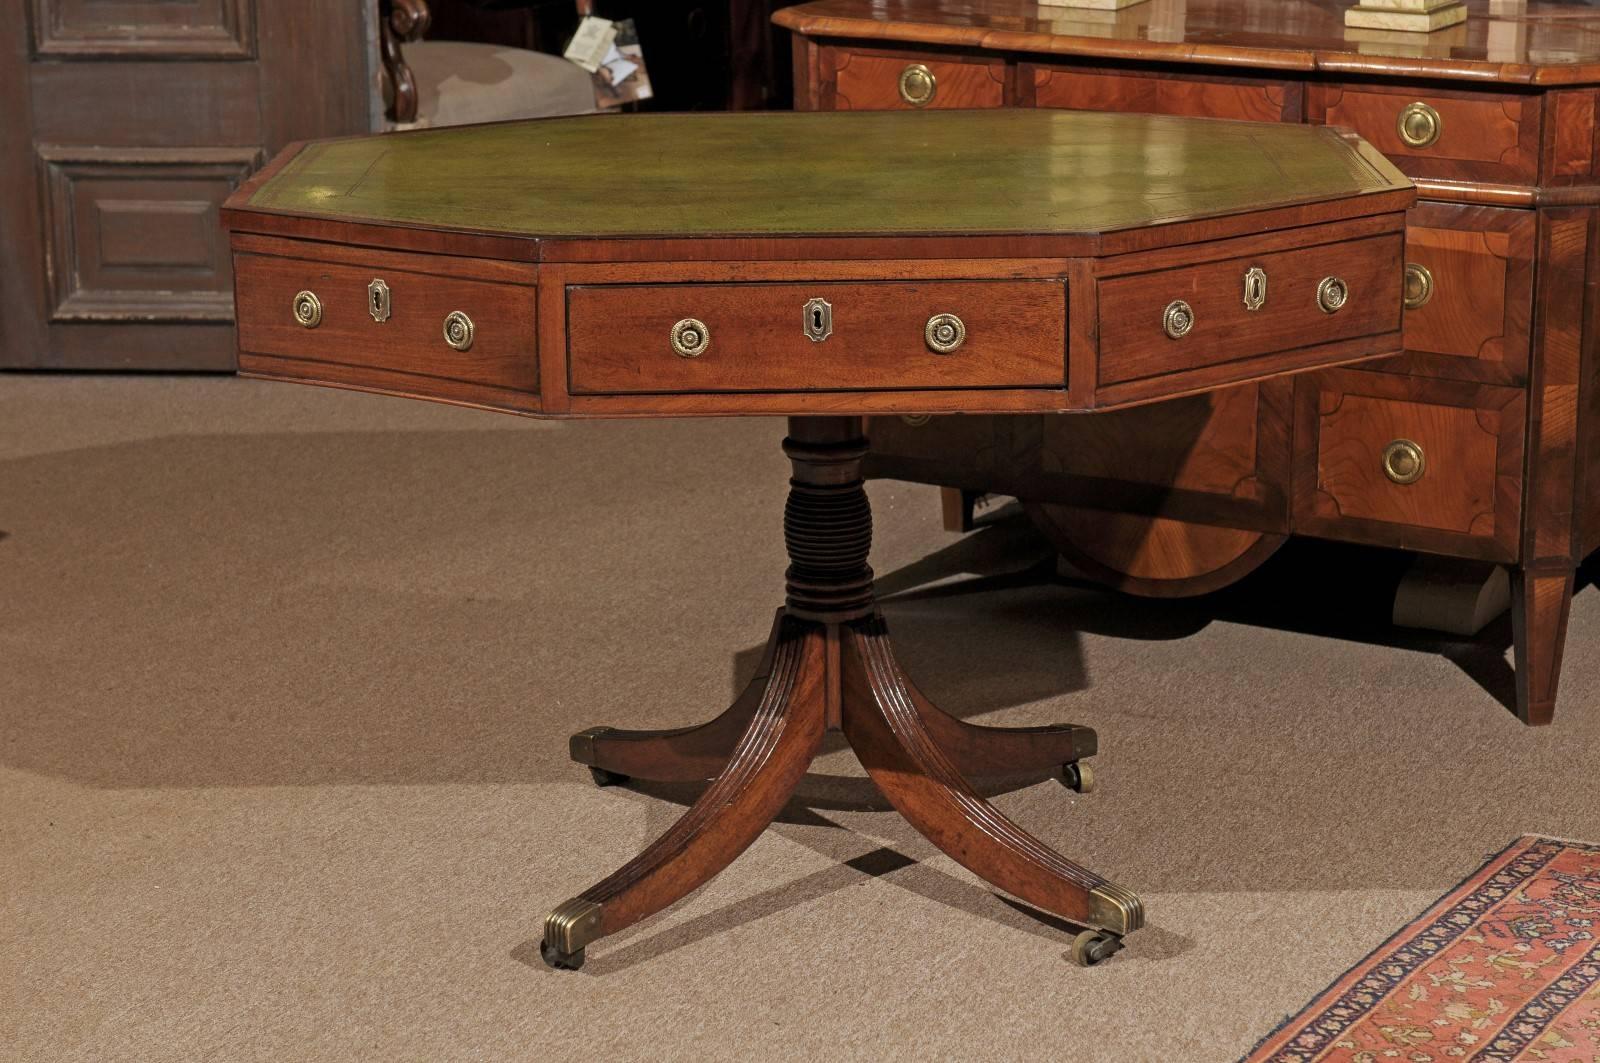 Early 19th century English Regency octagonal mahogany rent table with green leather top, reeded pedestal base, and splay legs.